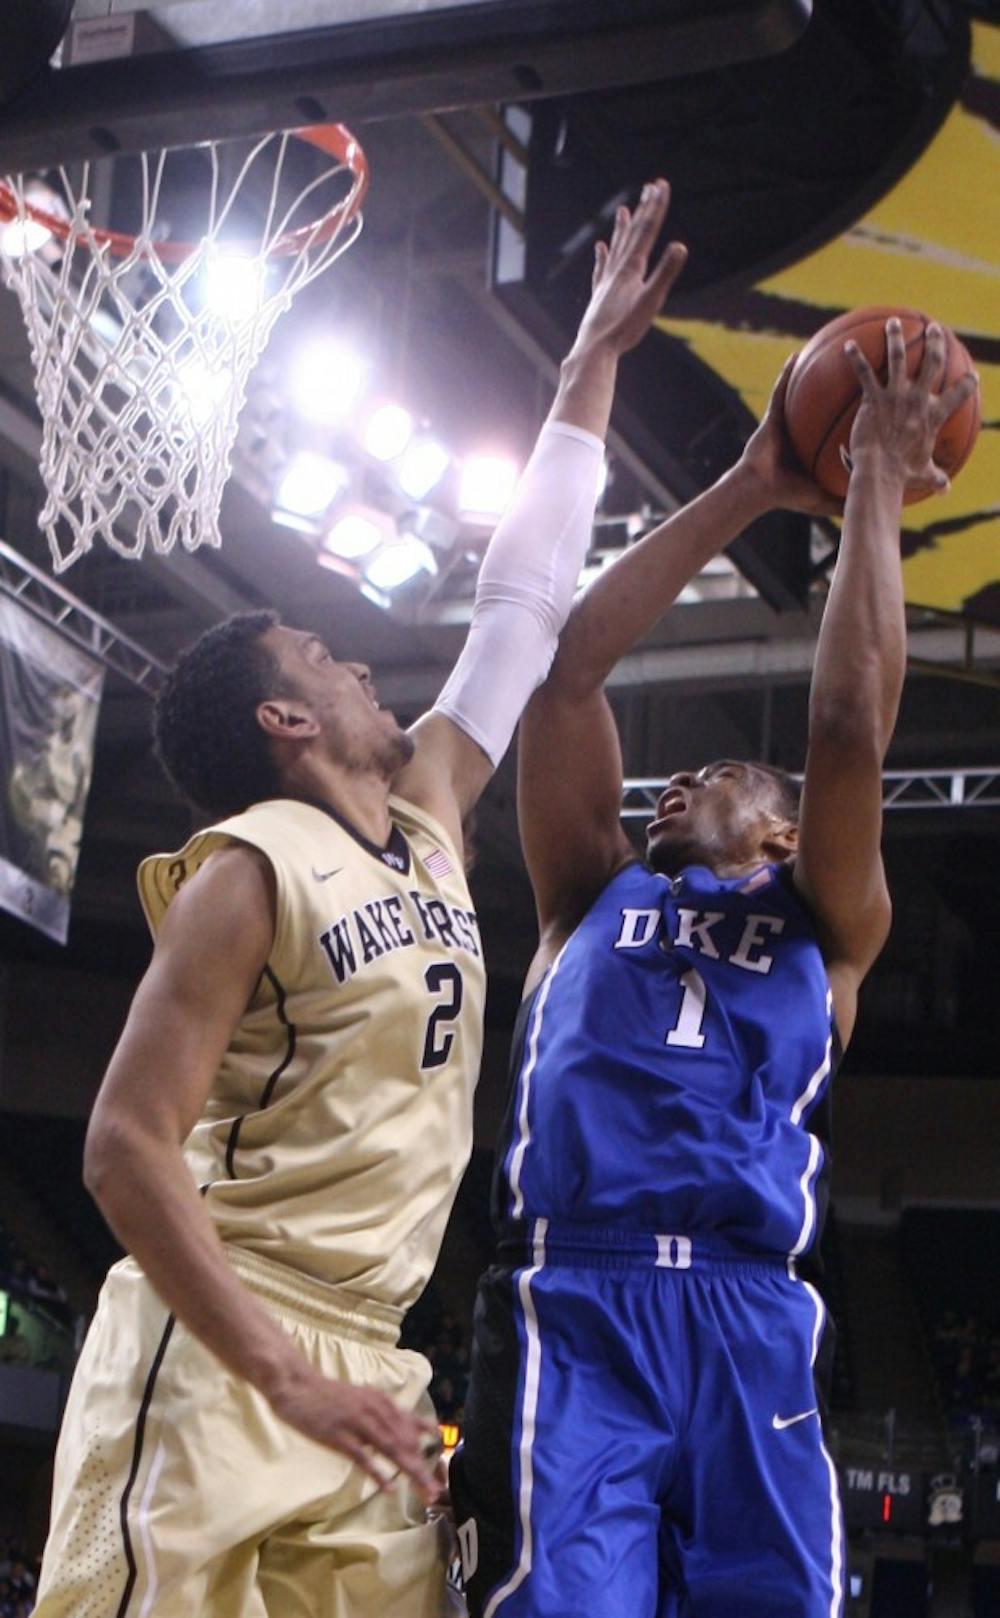 A dunk by Jabari Parker put Duke up 66-59 before a 17-0 run changed the course of the contest.